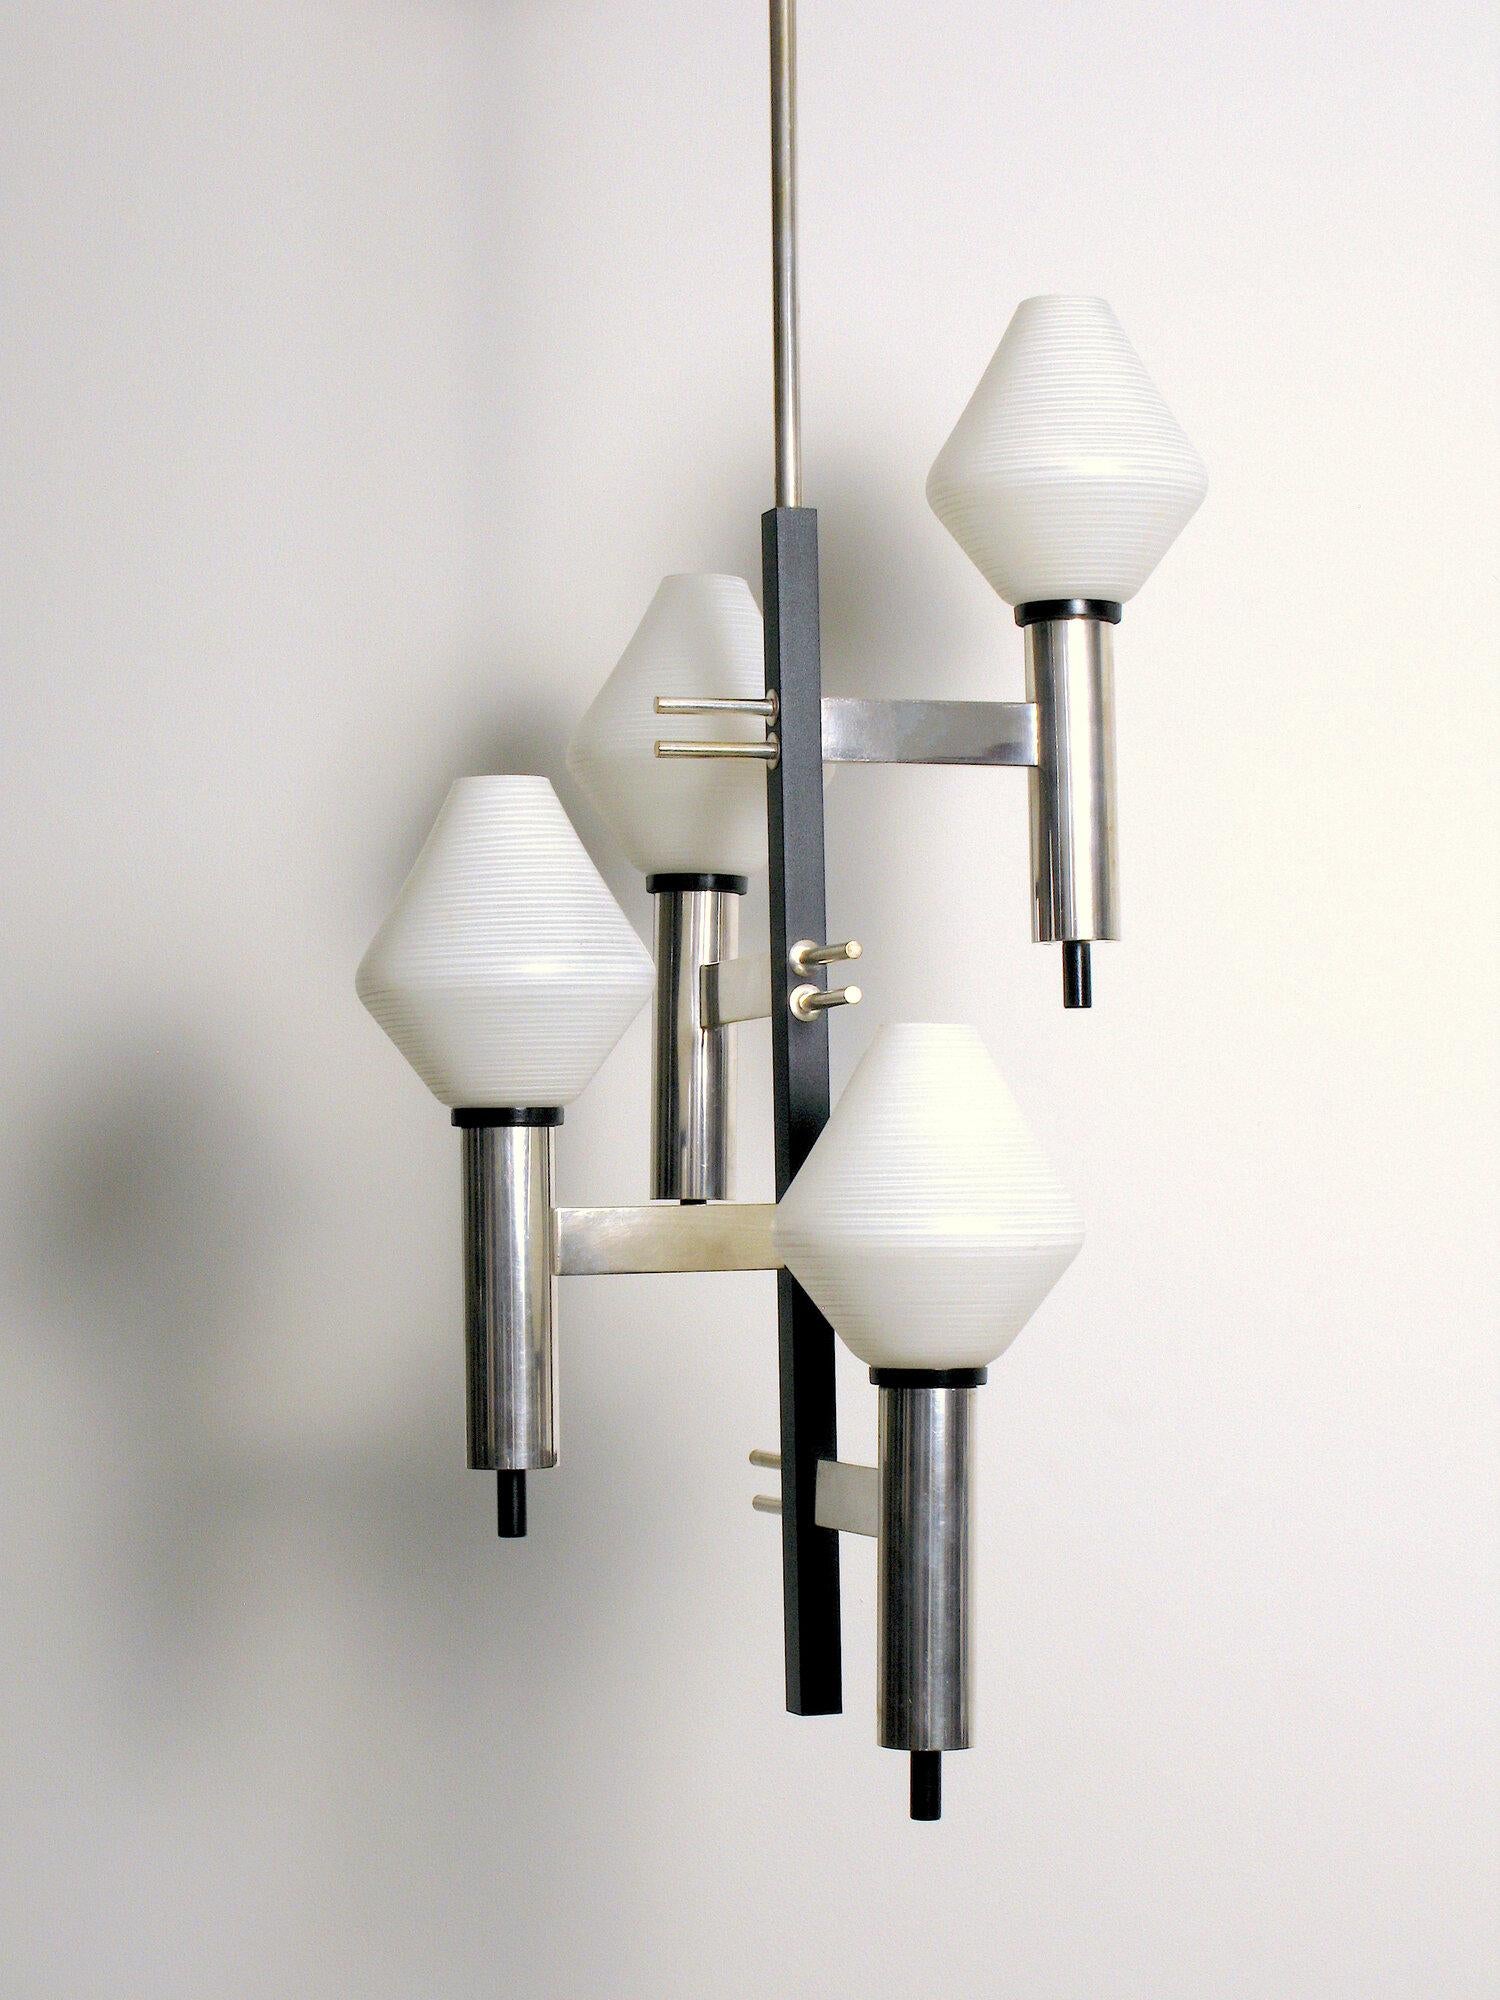 Four light silver chandelier manufactured in the 1950s and attributed to Stilnovo. Enamelled brass body, silver plated brass fittings, etched glass globes, silver plated steel stem.

Partially rewired with new E-12 candelabra base sockets.